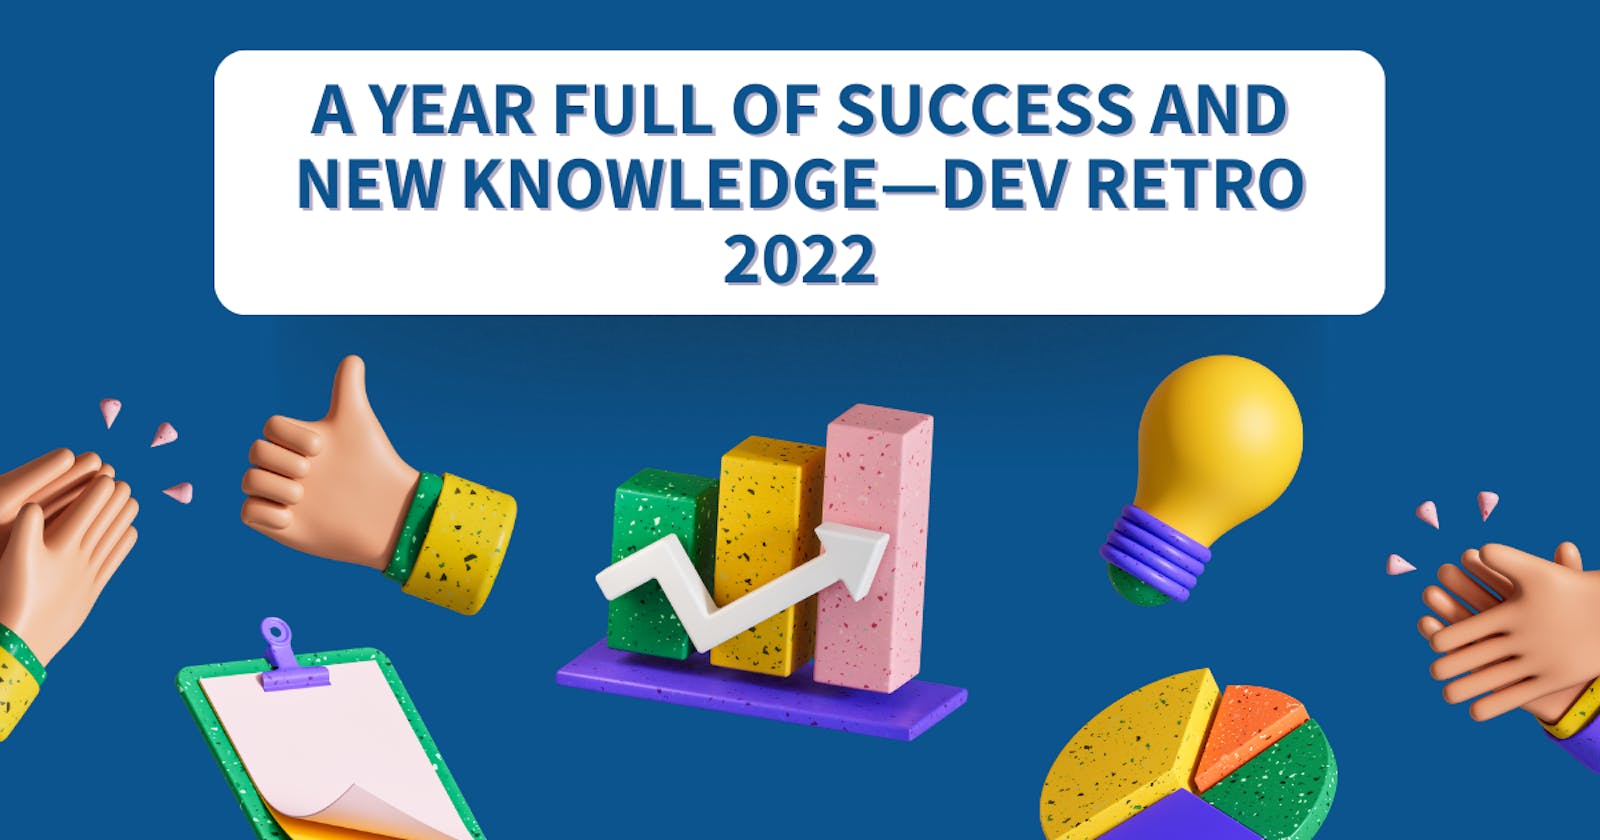 A year full of success and new knowledge—Dev Retro 2022